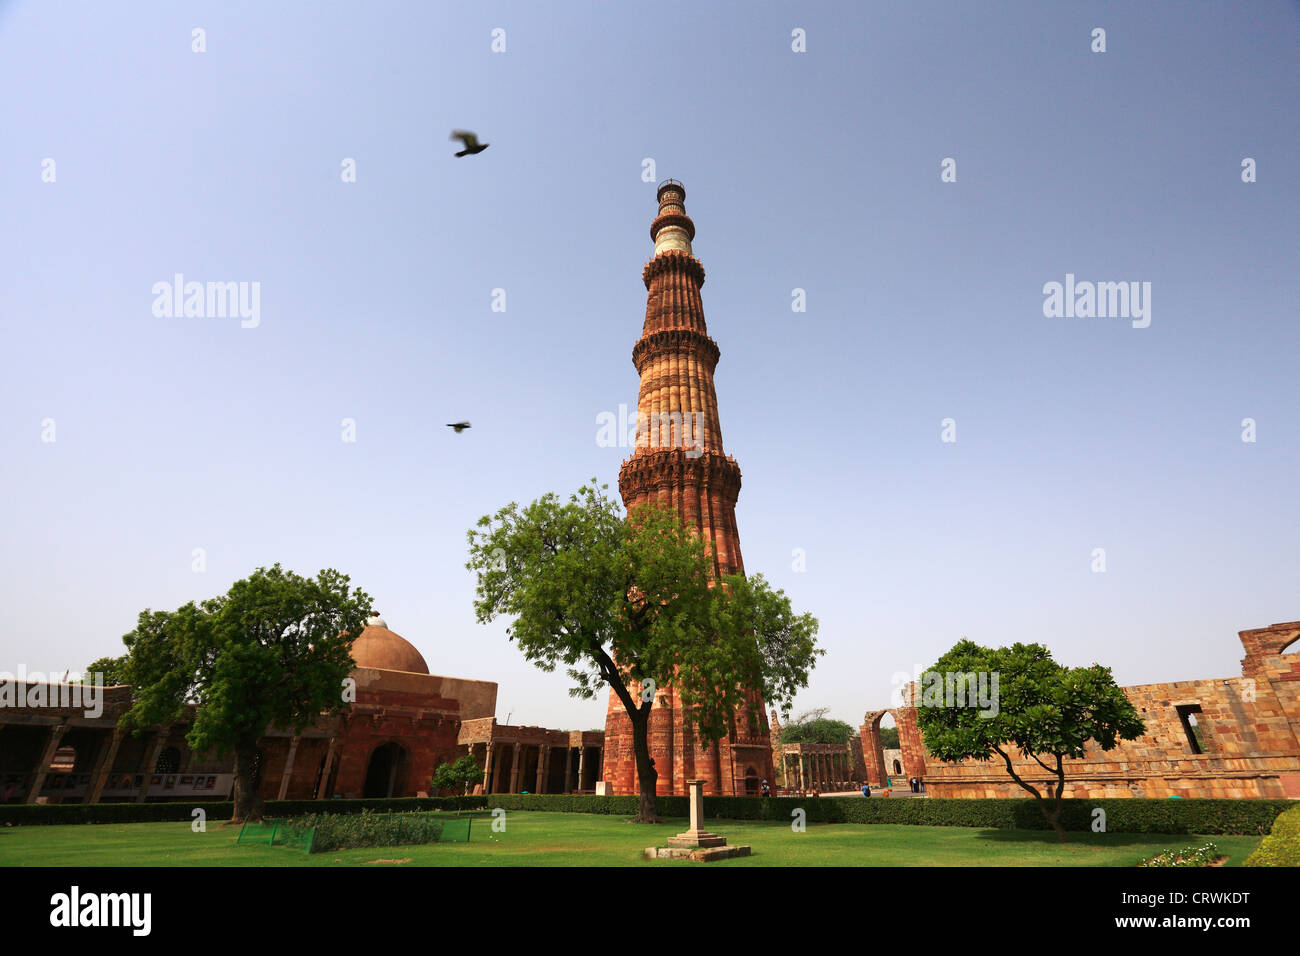 Qutab Minar, the UNESCO World Heritage Site, Qutab Minar is among the tallest red sandstone tower in India. Stock Photo